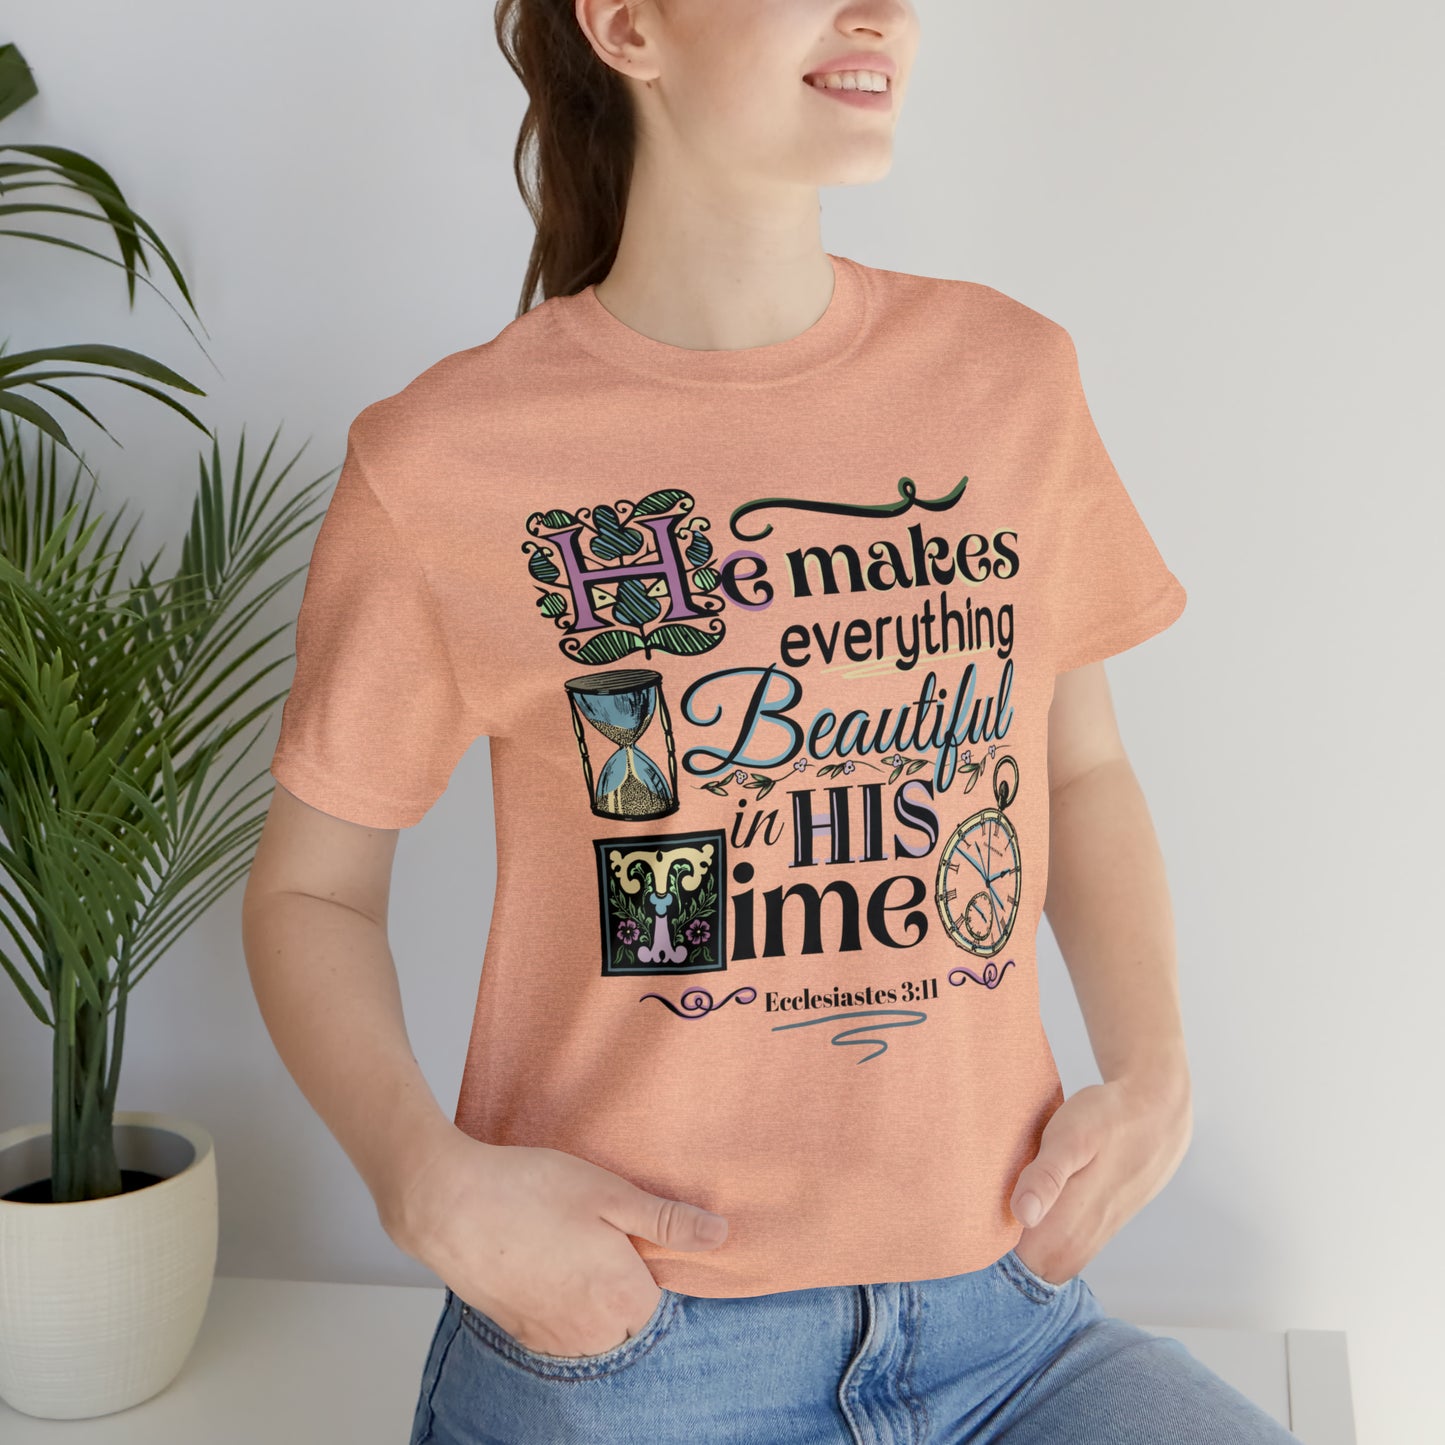 Beautiful in His Time (Green Pastures Apparel)